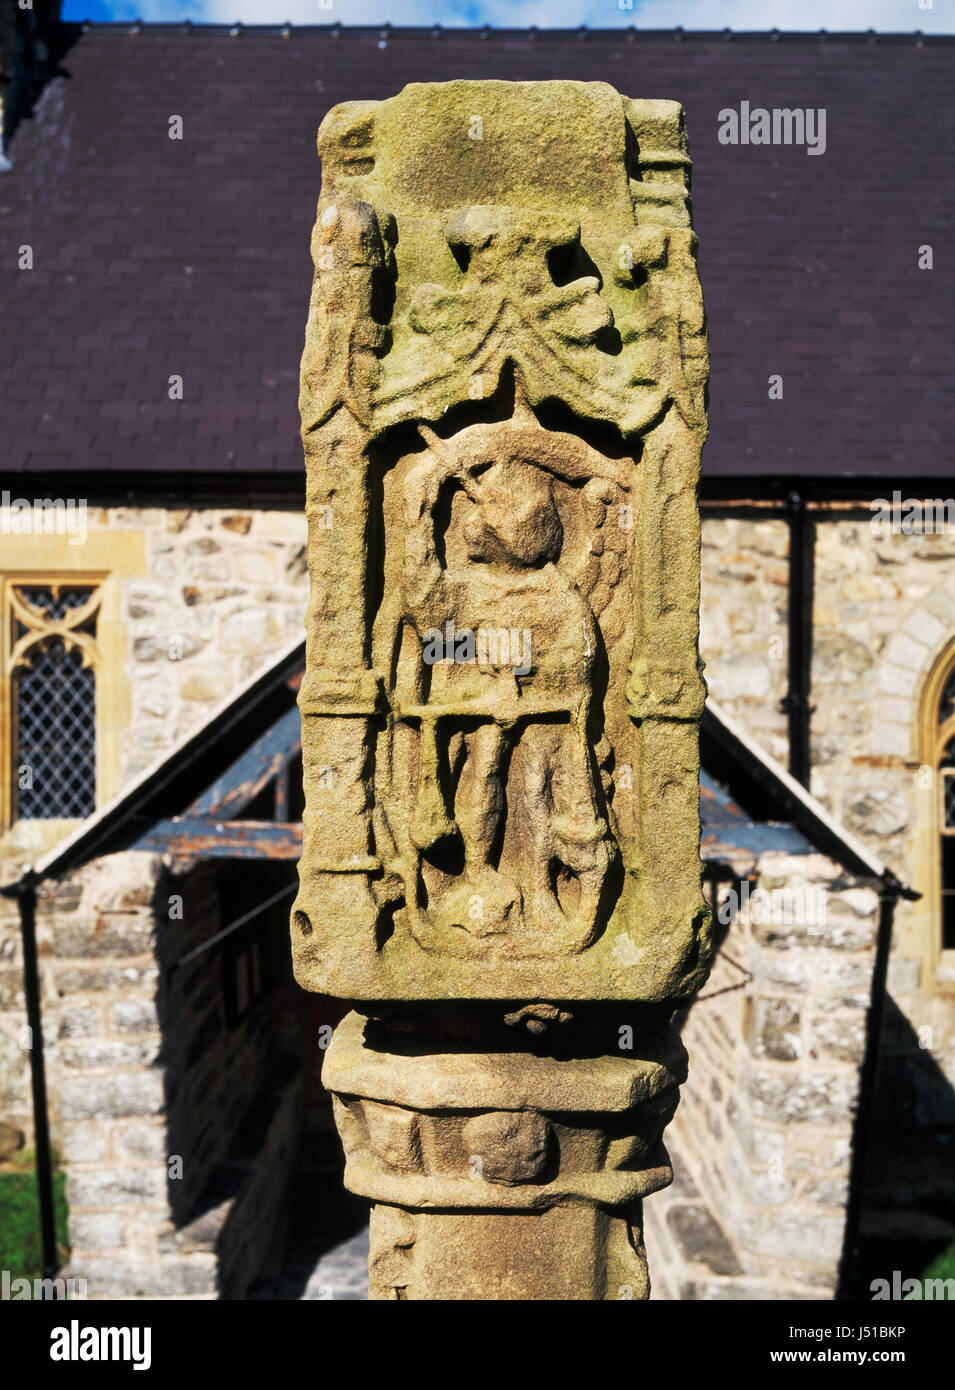 Eroded St Michael figure with wings, raised sword & scales of justice on S face of C15th preaching cross in St Mary's churchyard, Derwen, North Wales. Stock Photo